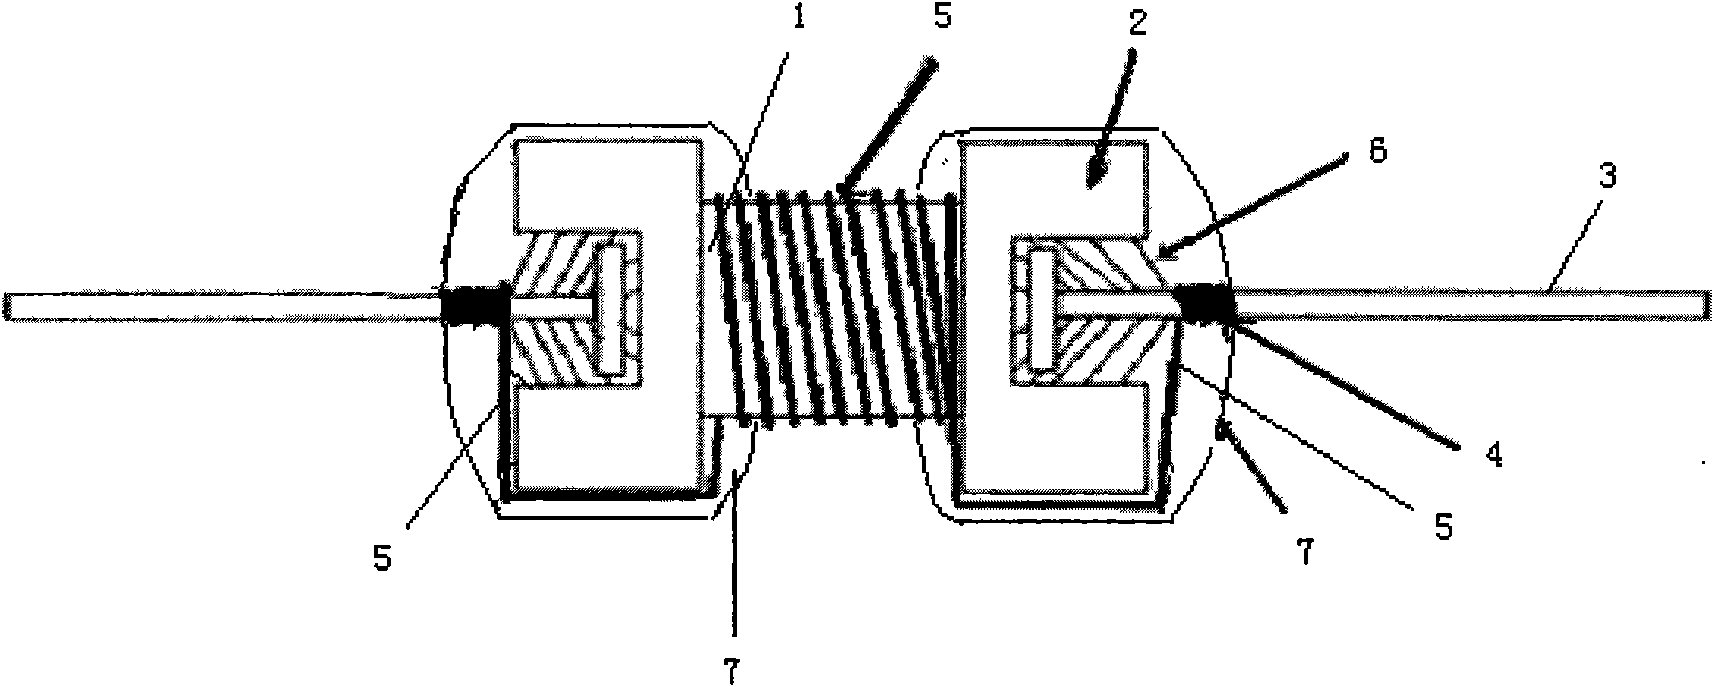 Encapsulating method of colour loop inductance product